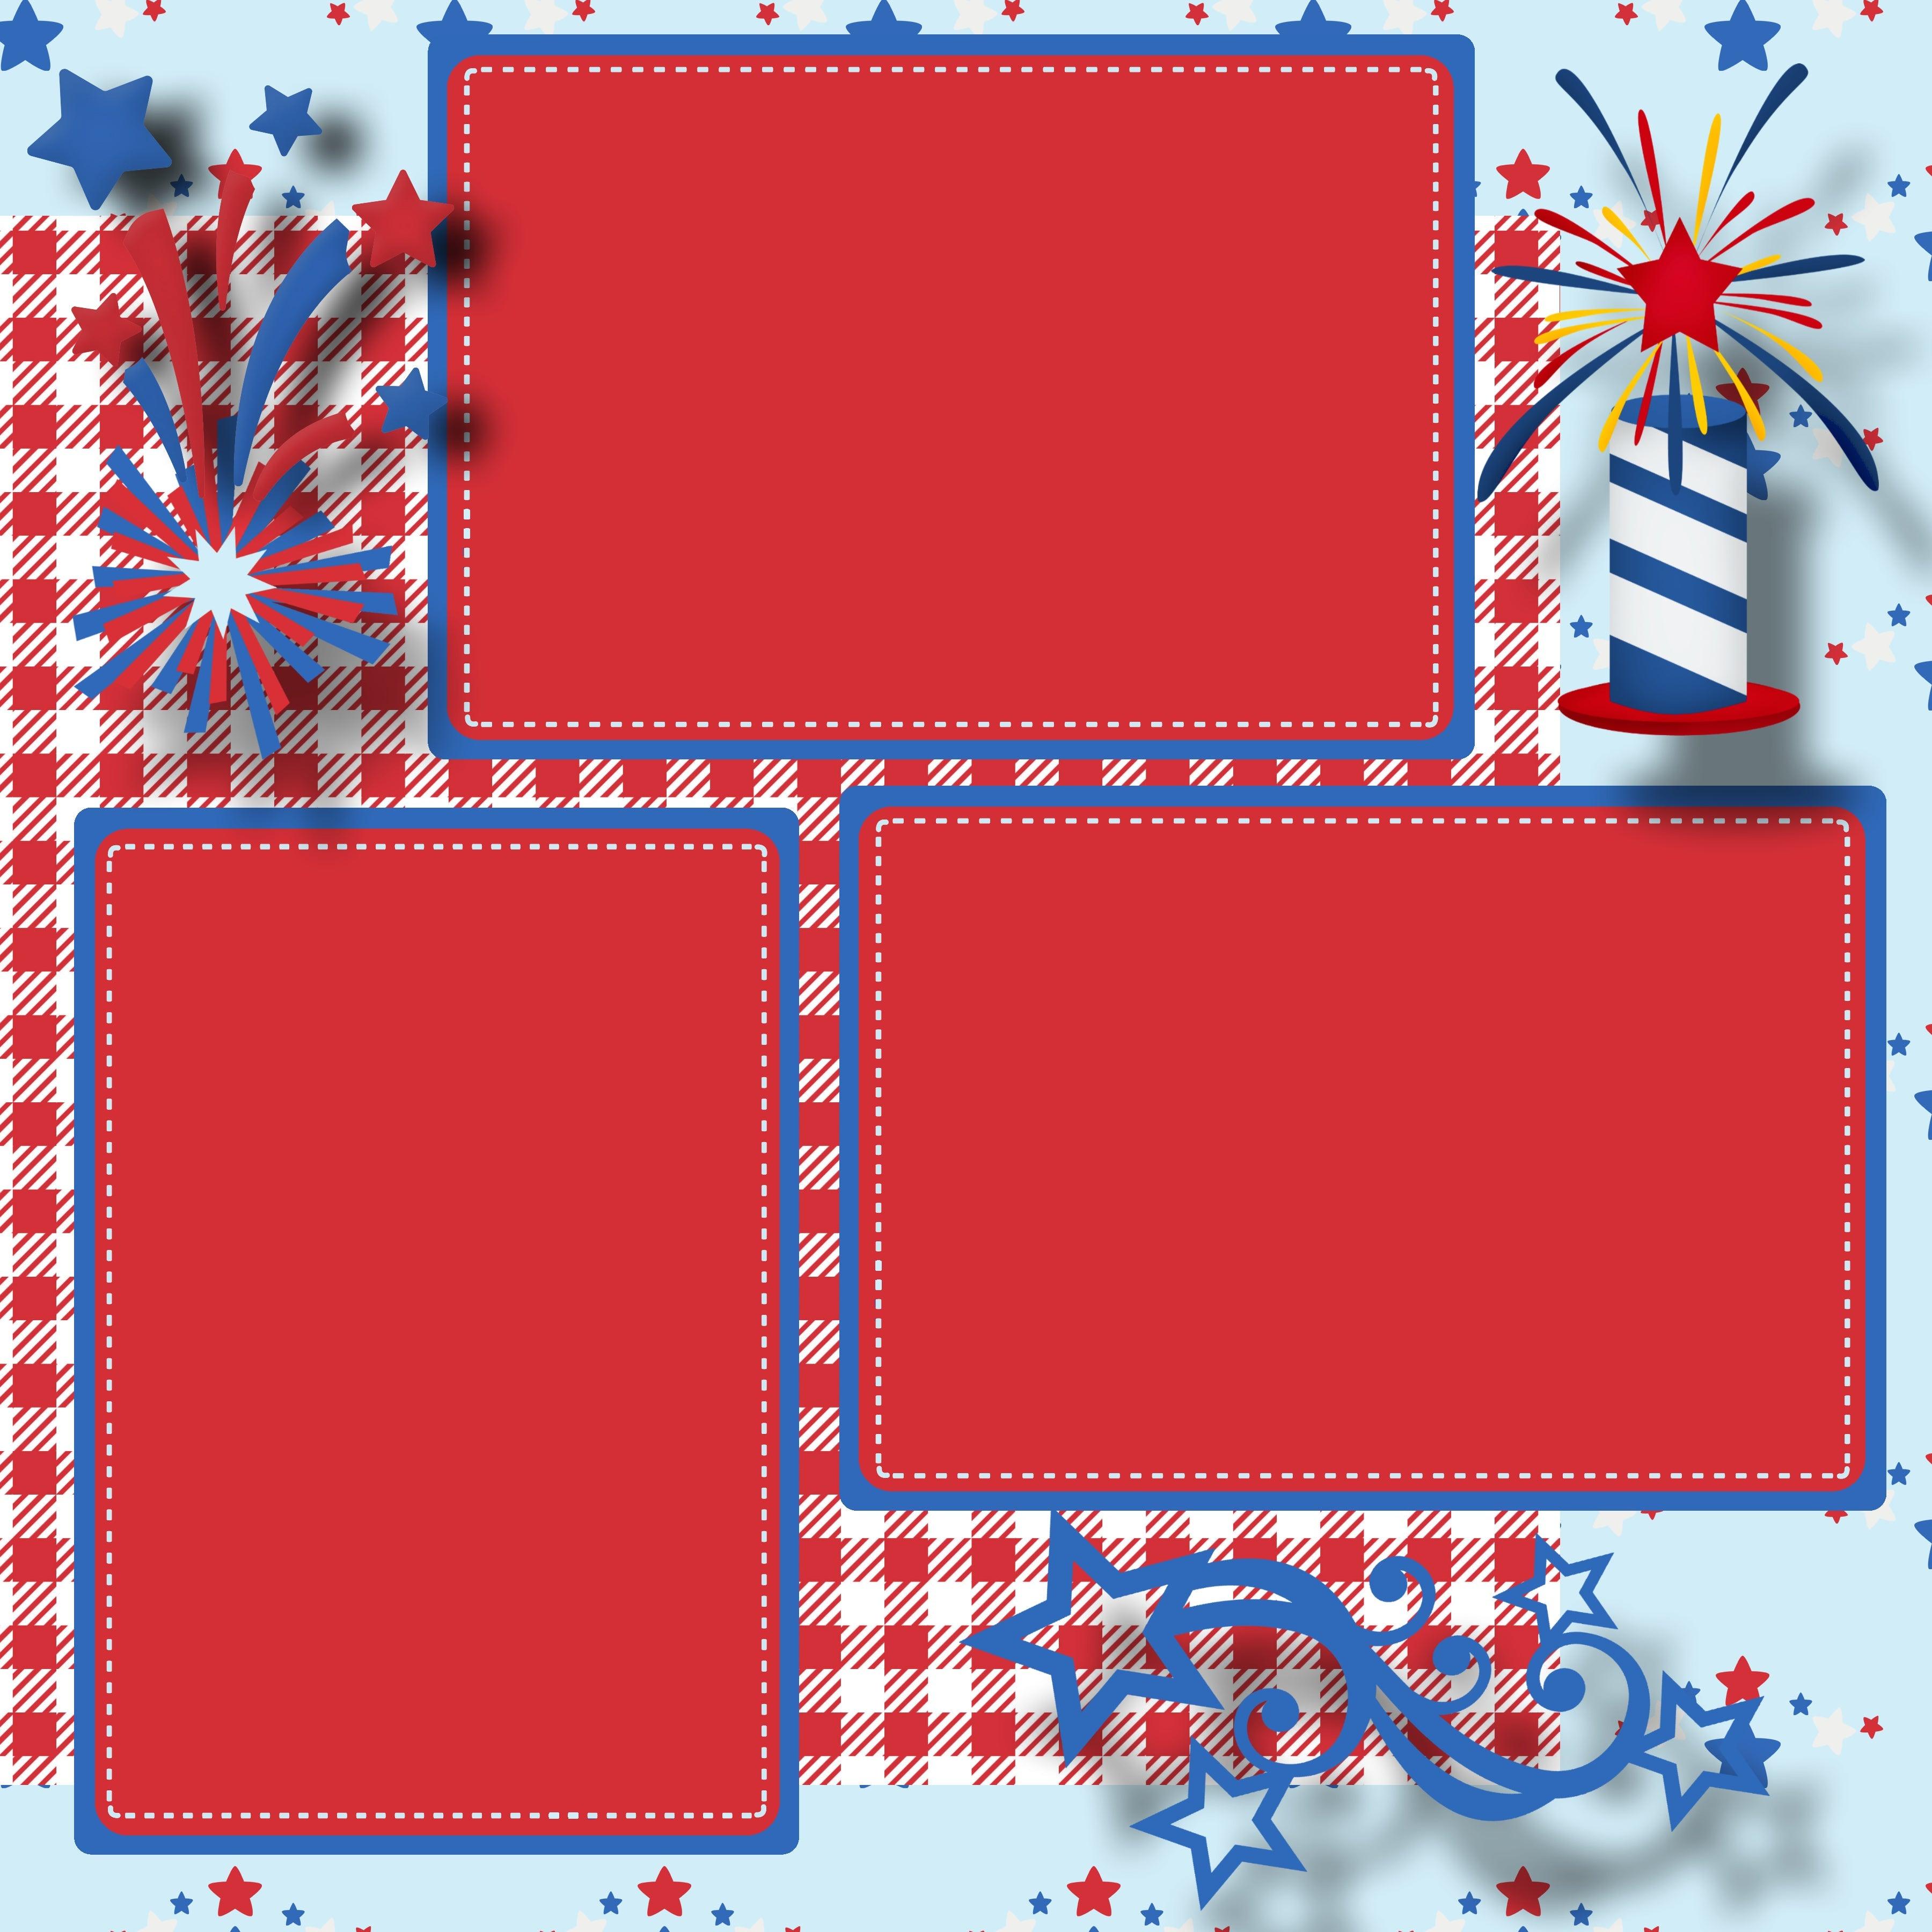 Fireworks (2) - 12 x 12 Premade, Printed Scrapbook Pages by SSC Designs - Scrapbook Supply Companies